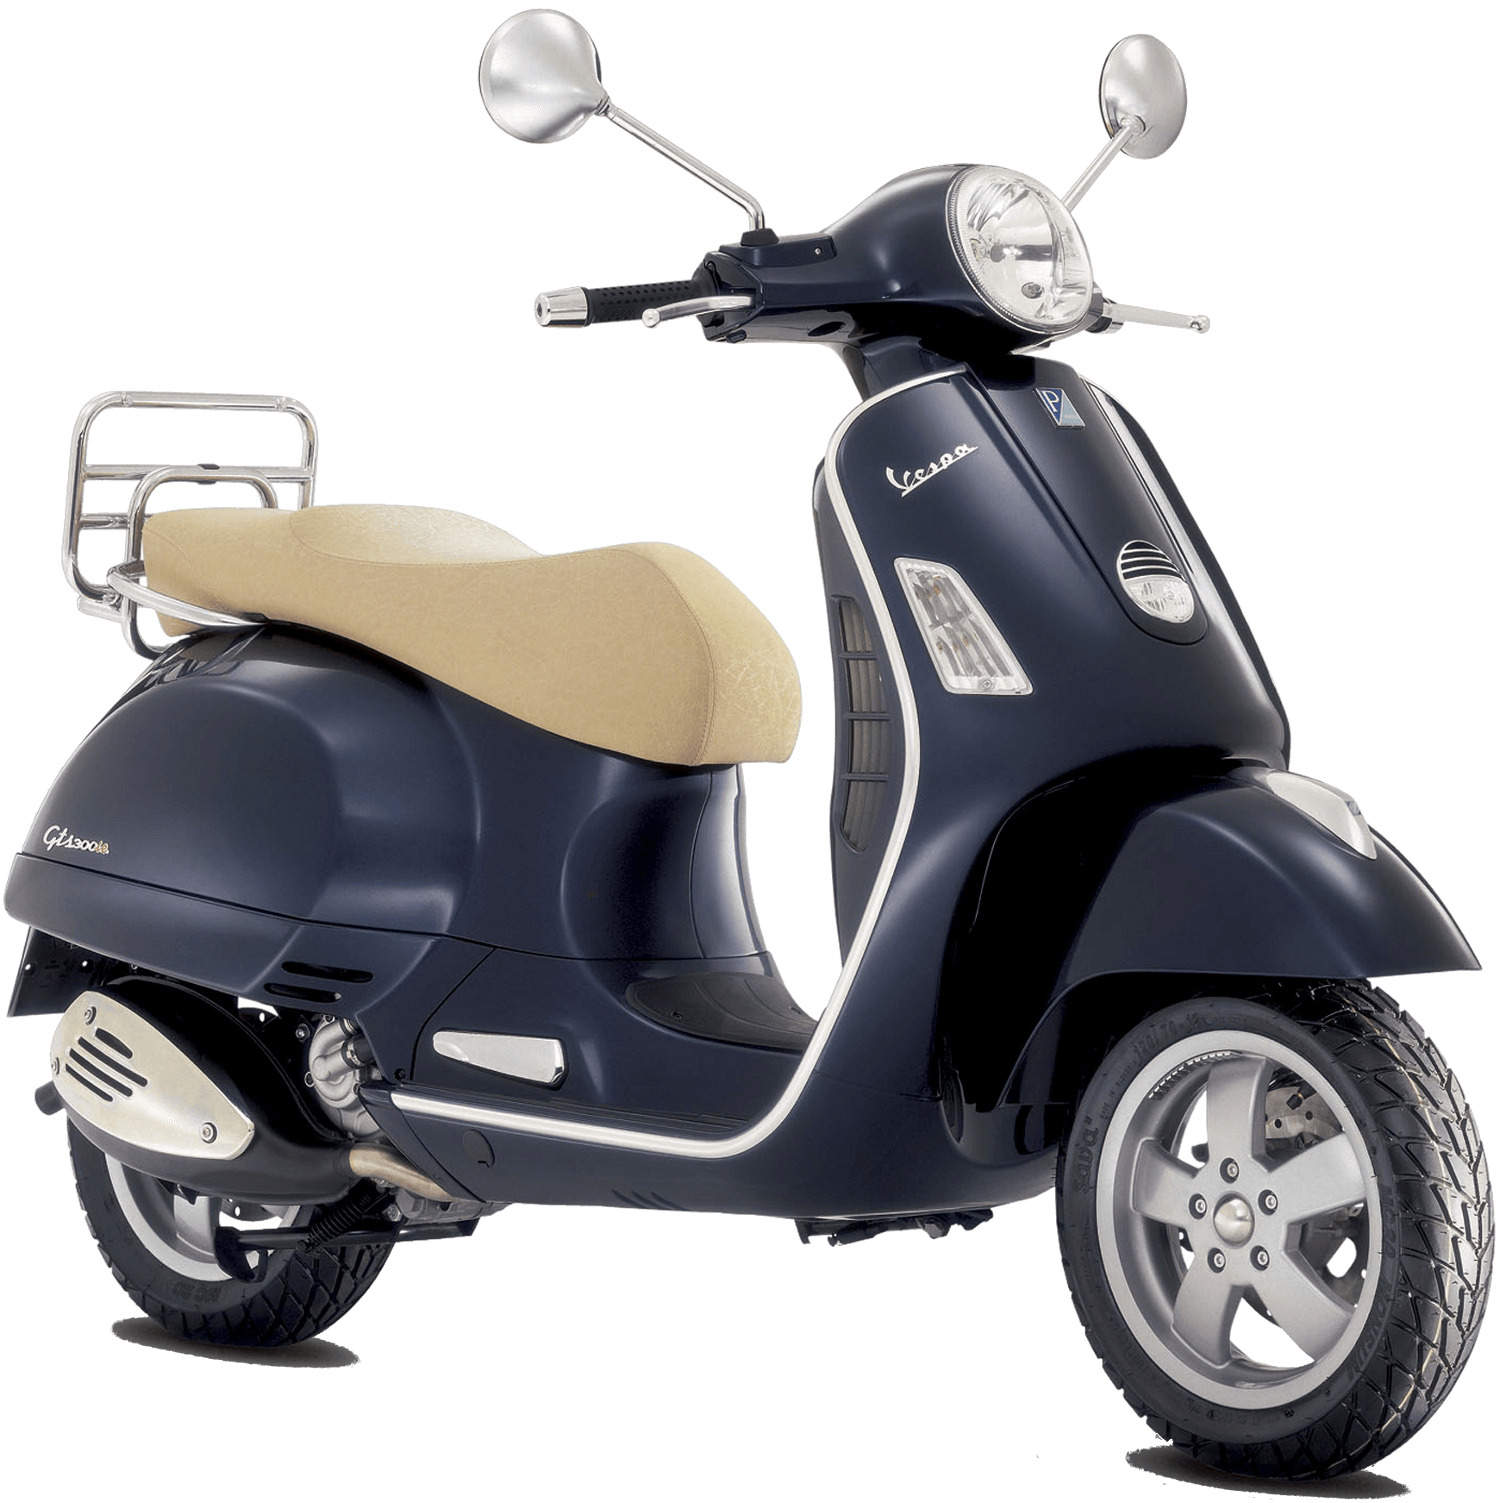 Scooter Vespa icons